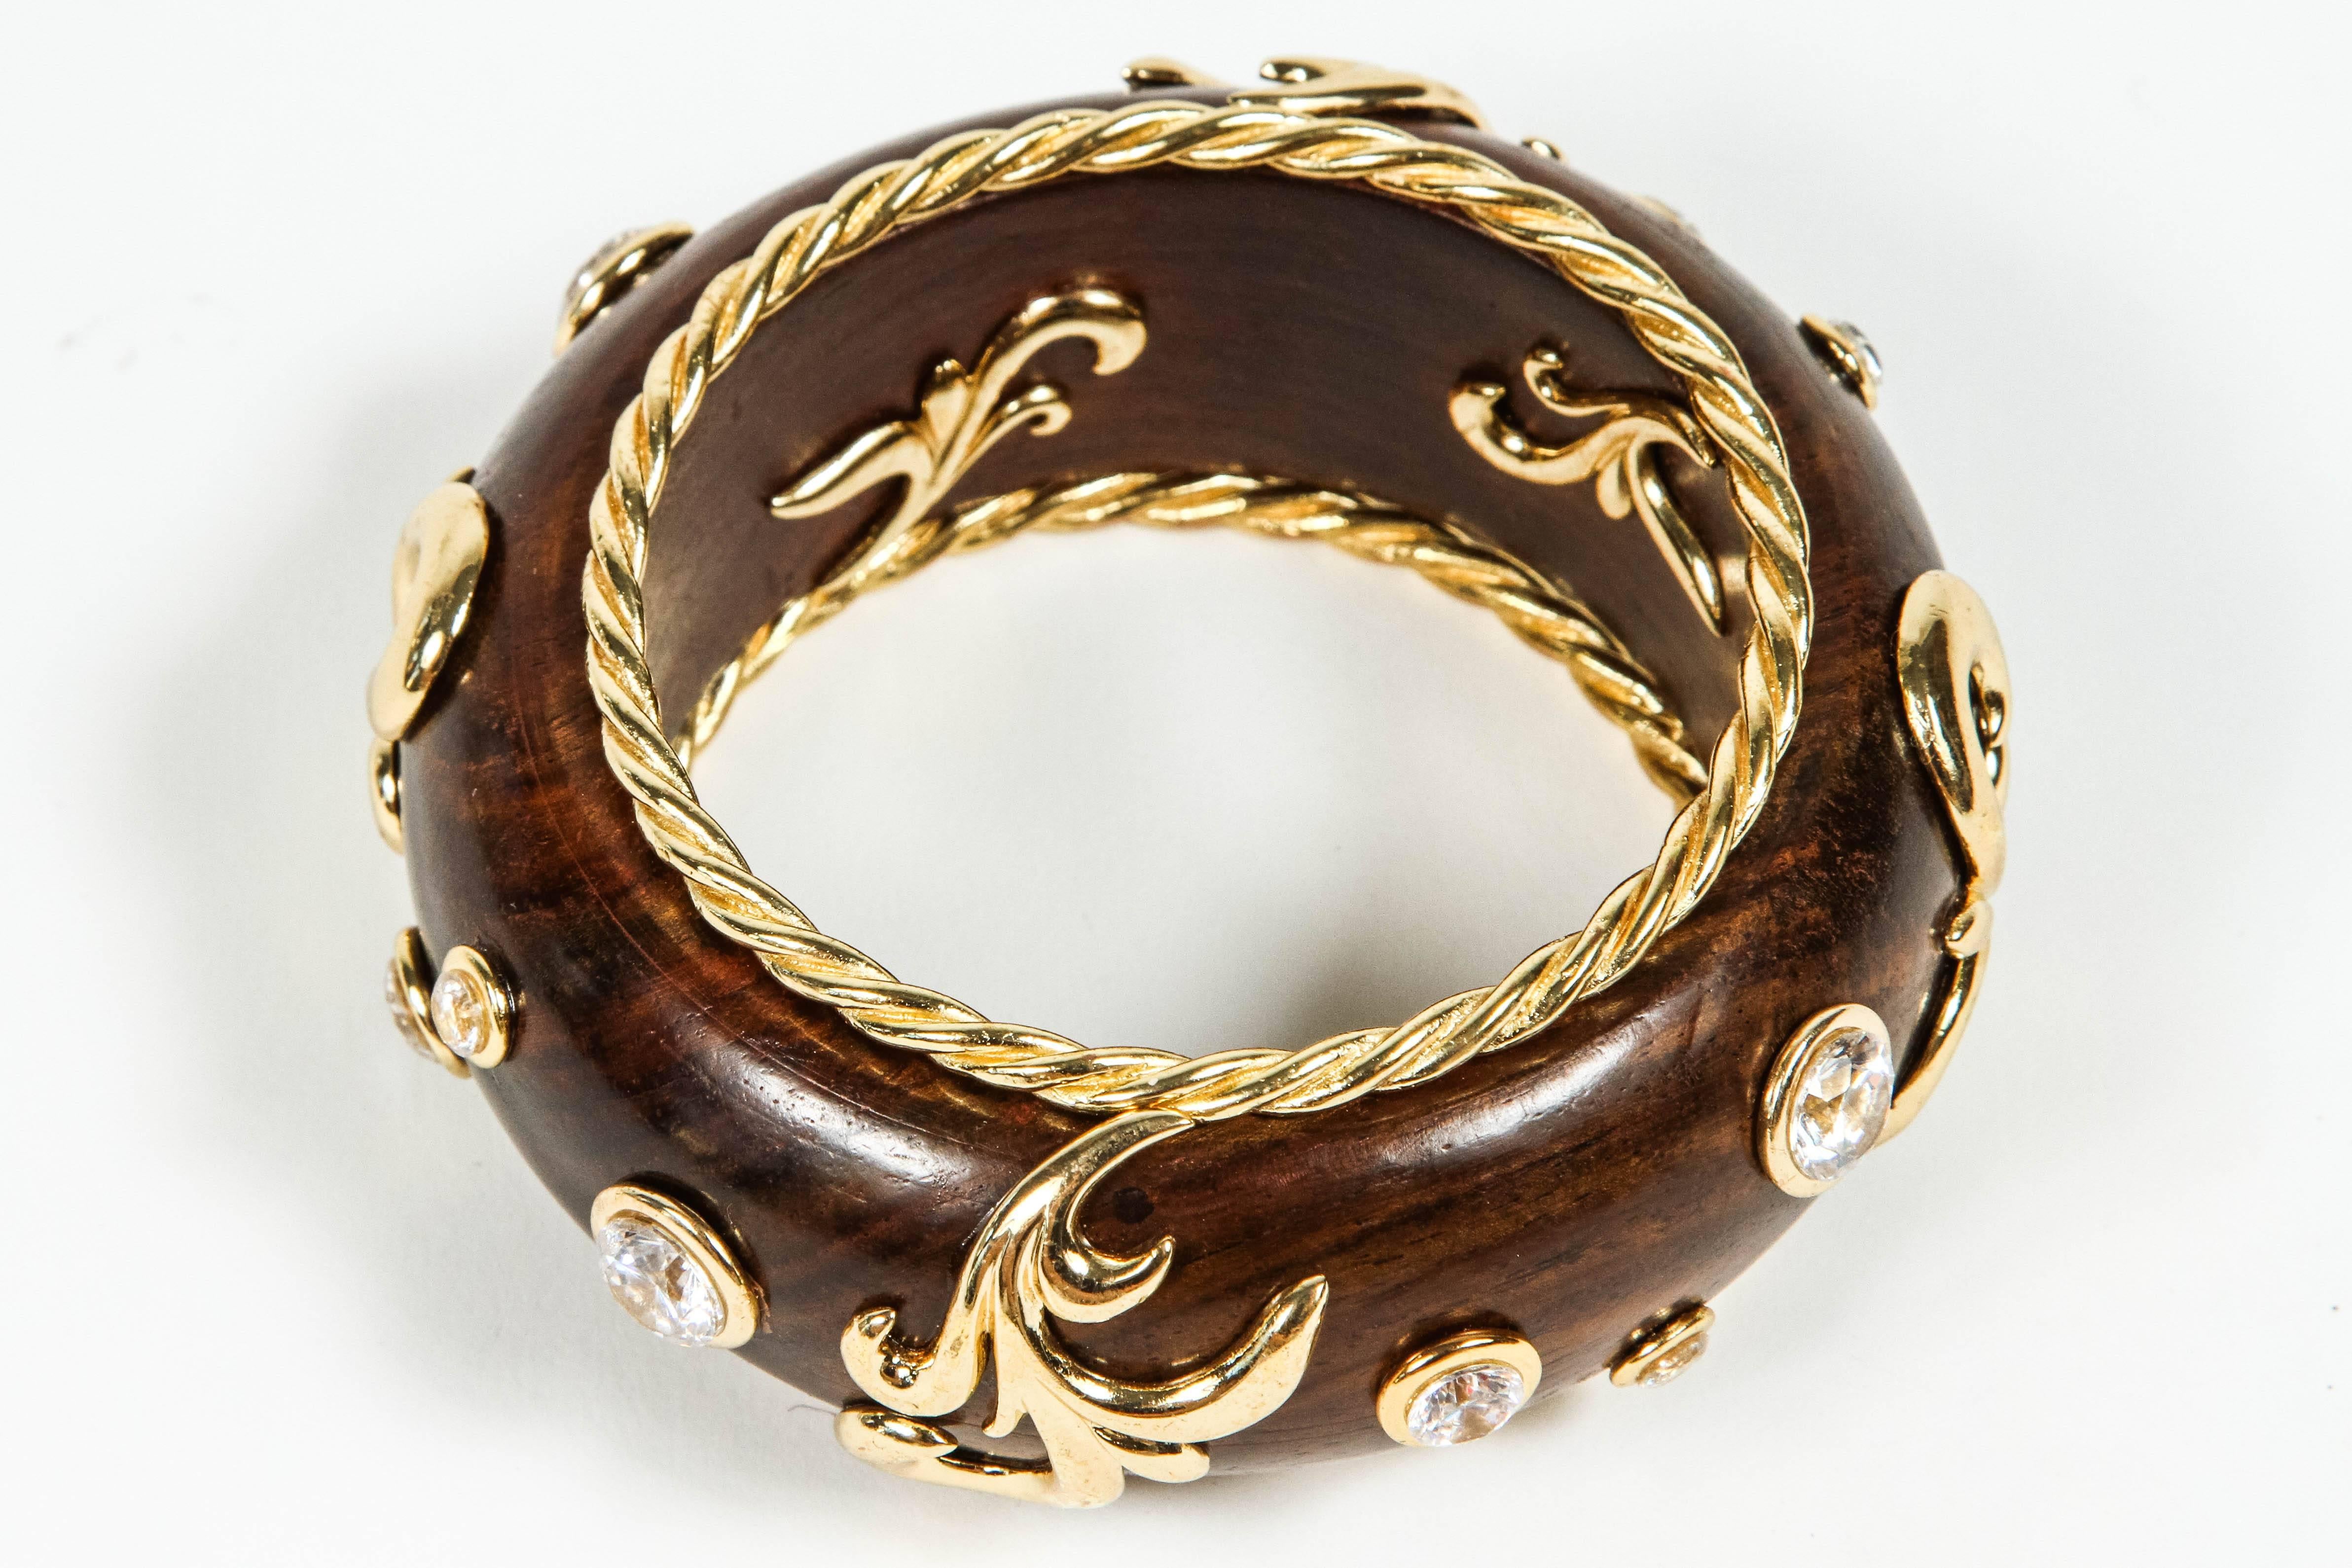 Beautiful Gilt Metal Rhinestone and Wood Bangle by Dominique Aurientis 2